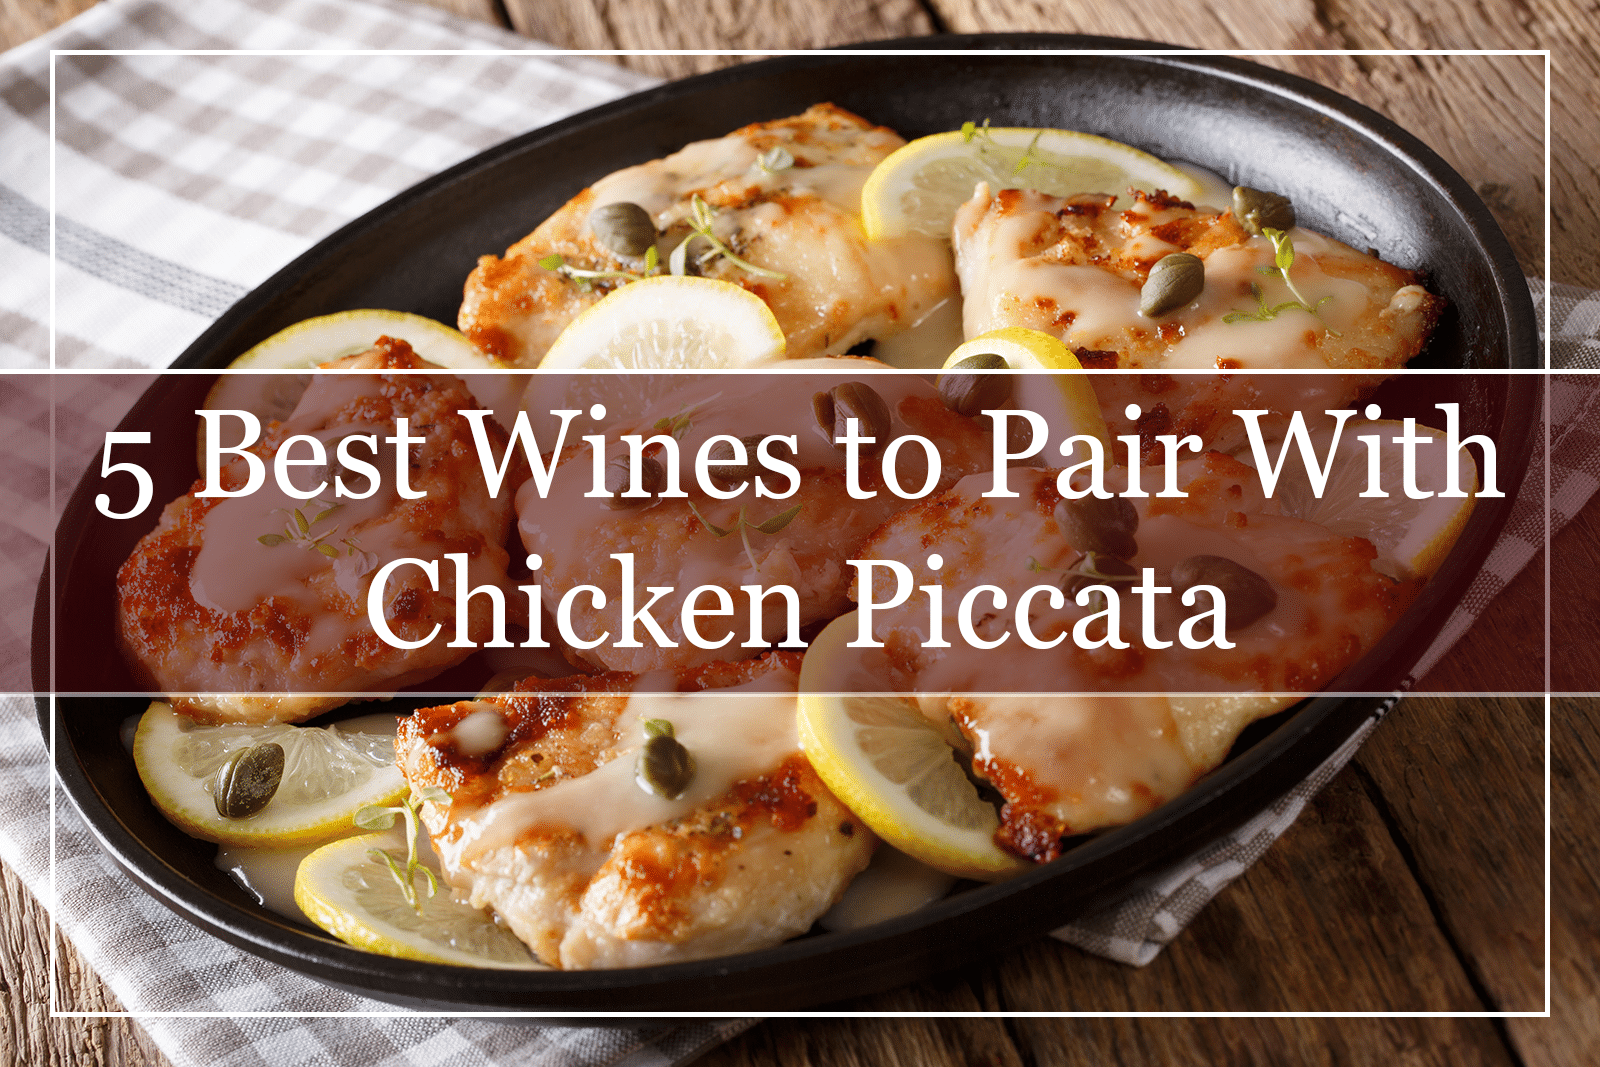 5 Best Wines to Pair With Chicken Piccata (2022)